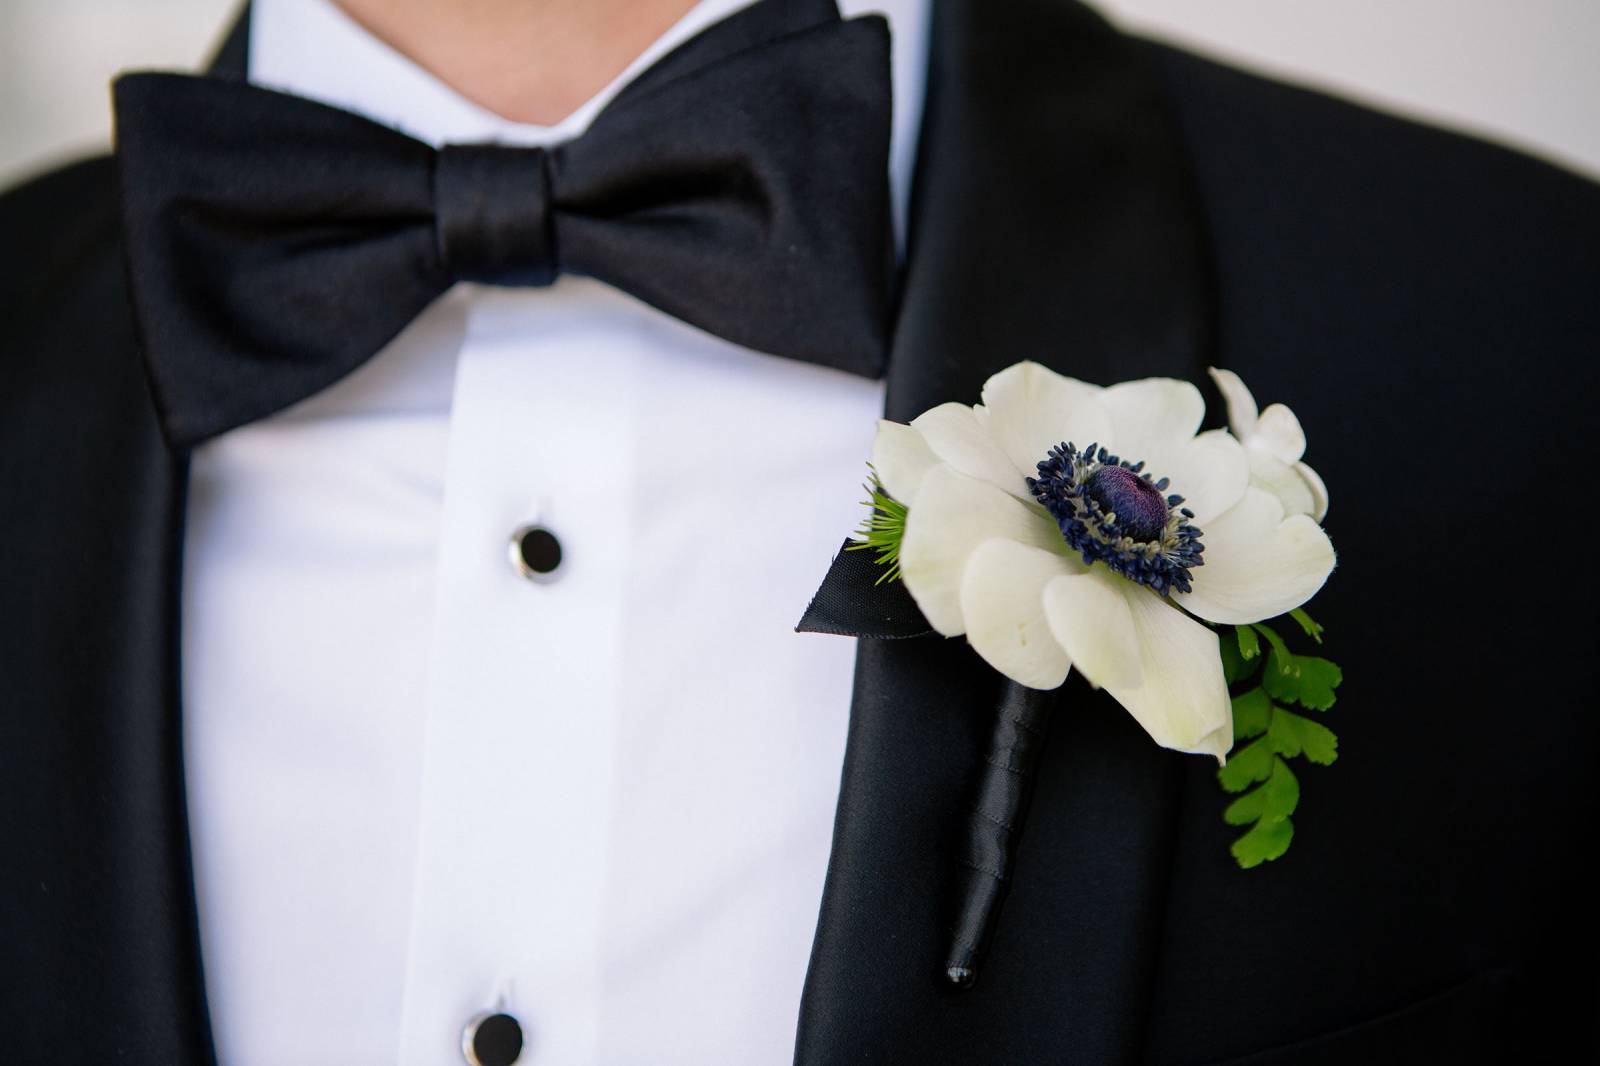 grooms boutonniere of anemone and fern branch